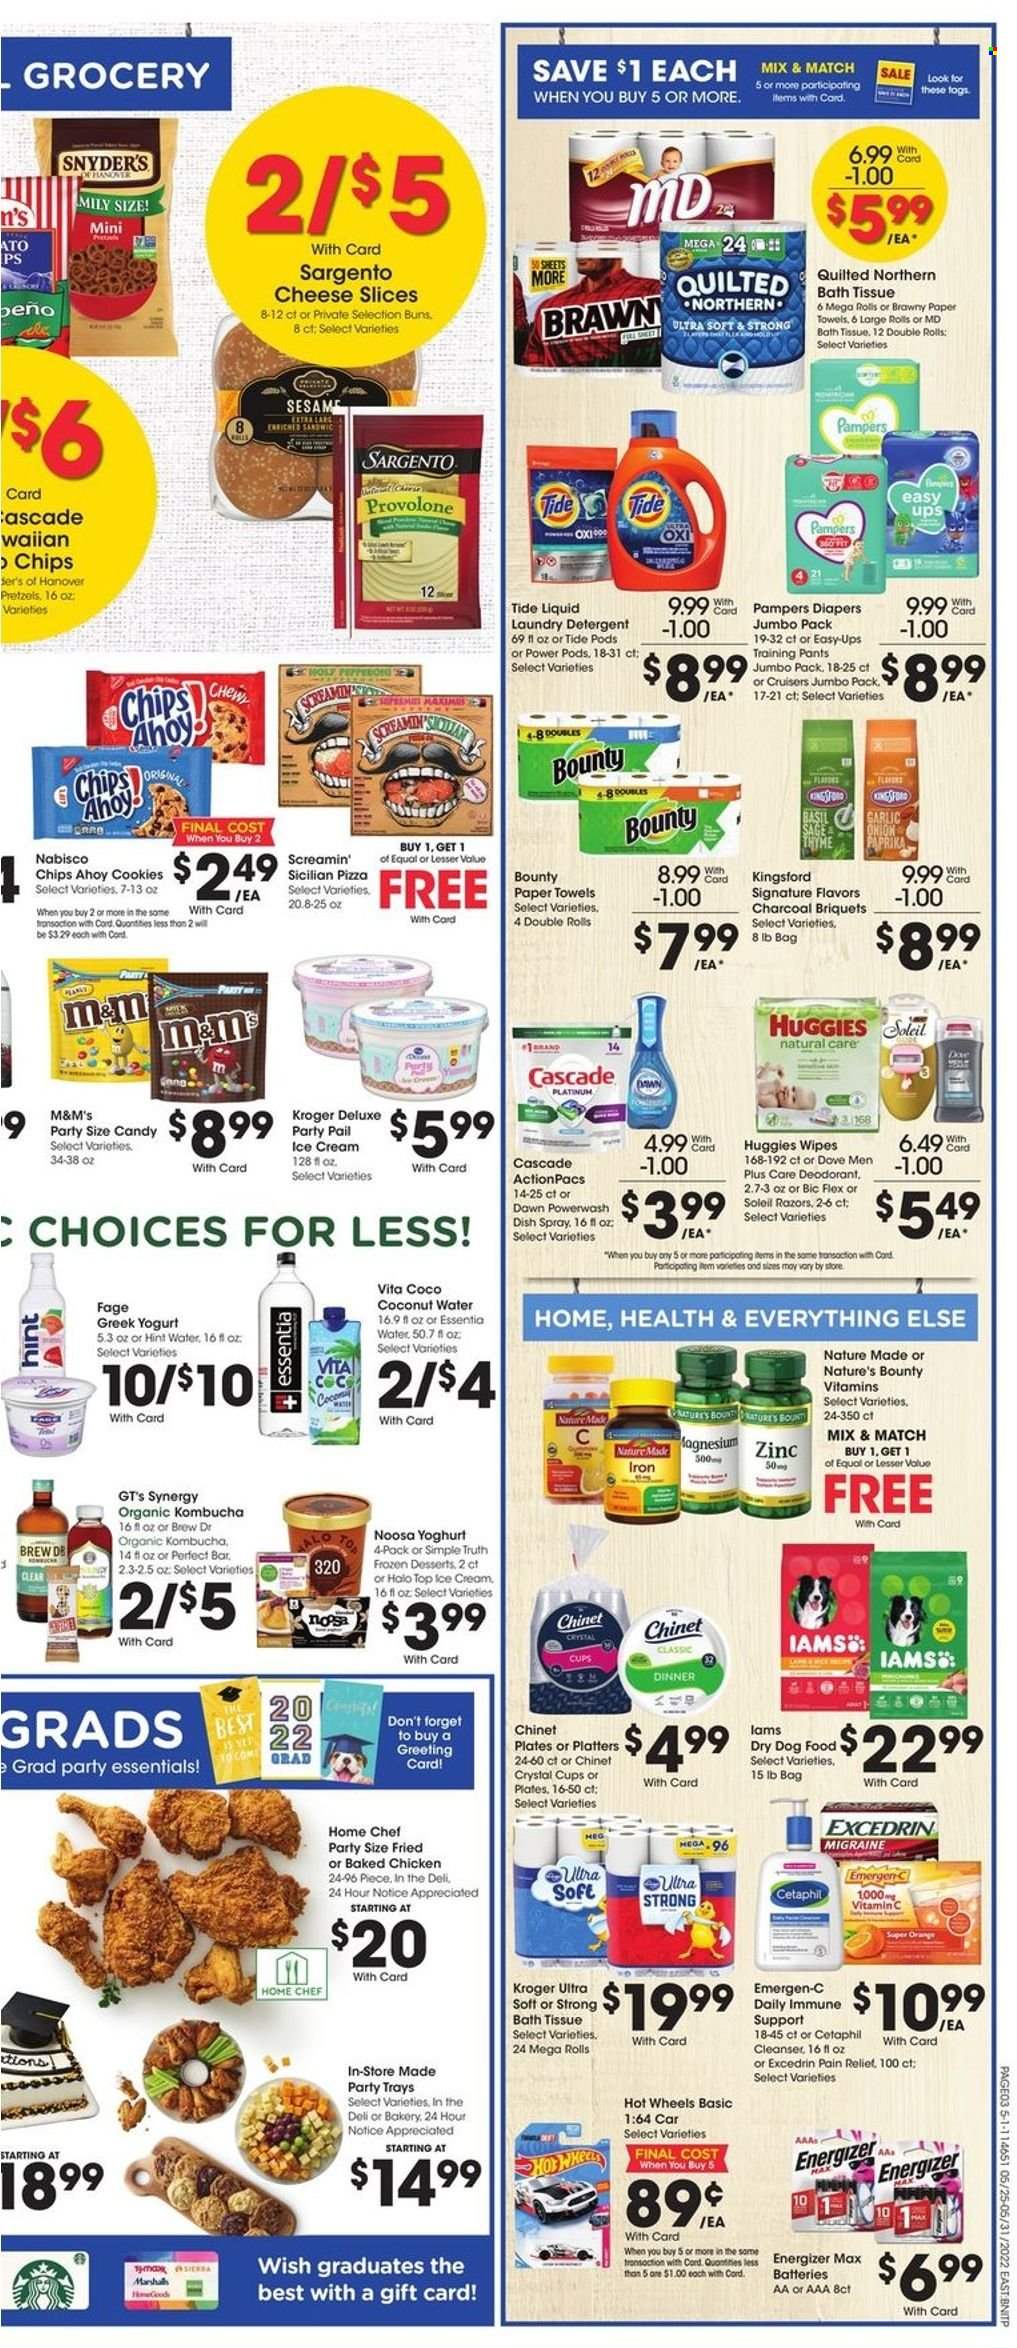 thumbnail - Fred Meyer Flyer - 05/25/2022 - 05/31/2022 - Sales products - pretzels, buns, garlic, oranges, pizza, sliced cheese, Provolone, Sargento, greek yoghurt, yoghurt, ice cream, Screamin' Sicilian, cookies, M&M's, esponja, coconut water, kombucha, wipes, Huggies, Pampers, pants, nappies, baby pants, Hot Wheels, Dove, bath tissue, Quilted Northern, kitchen towels, paper towels, detergent, Cascade, Tide, laundry detergent, cleanser, anti-perspirant, deodorant, BIC, plate, cup, battery, Energizer, animal food, dry dog food, dog food, Iams, Marshall, iron, pain relief, Excedrin, magnesium, Nature Made, Nature's Bounty, vitamin c, zinc, Emergen-C. Page 6.